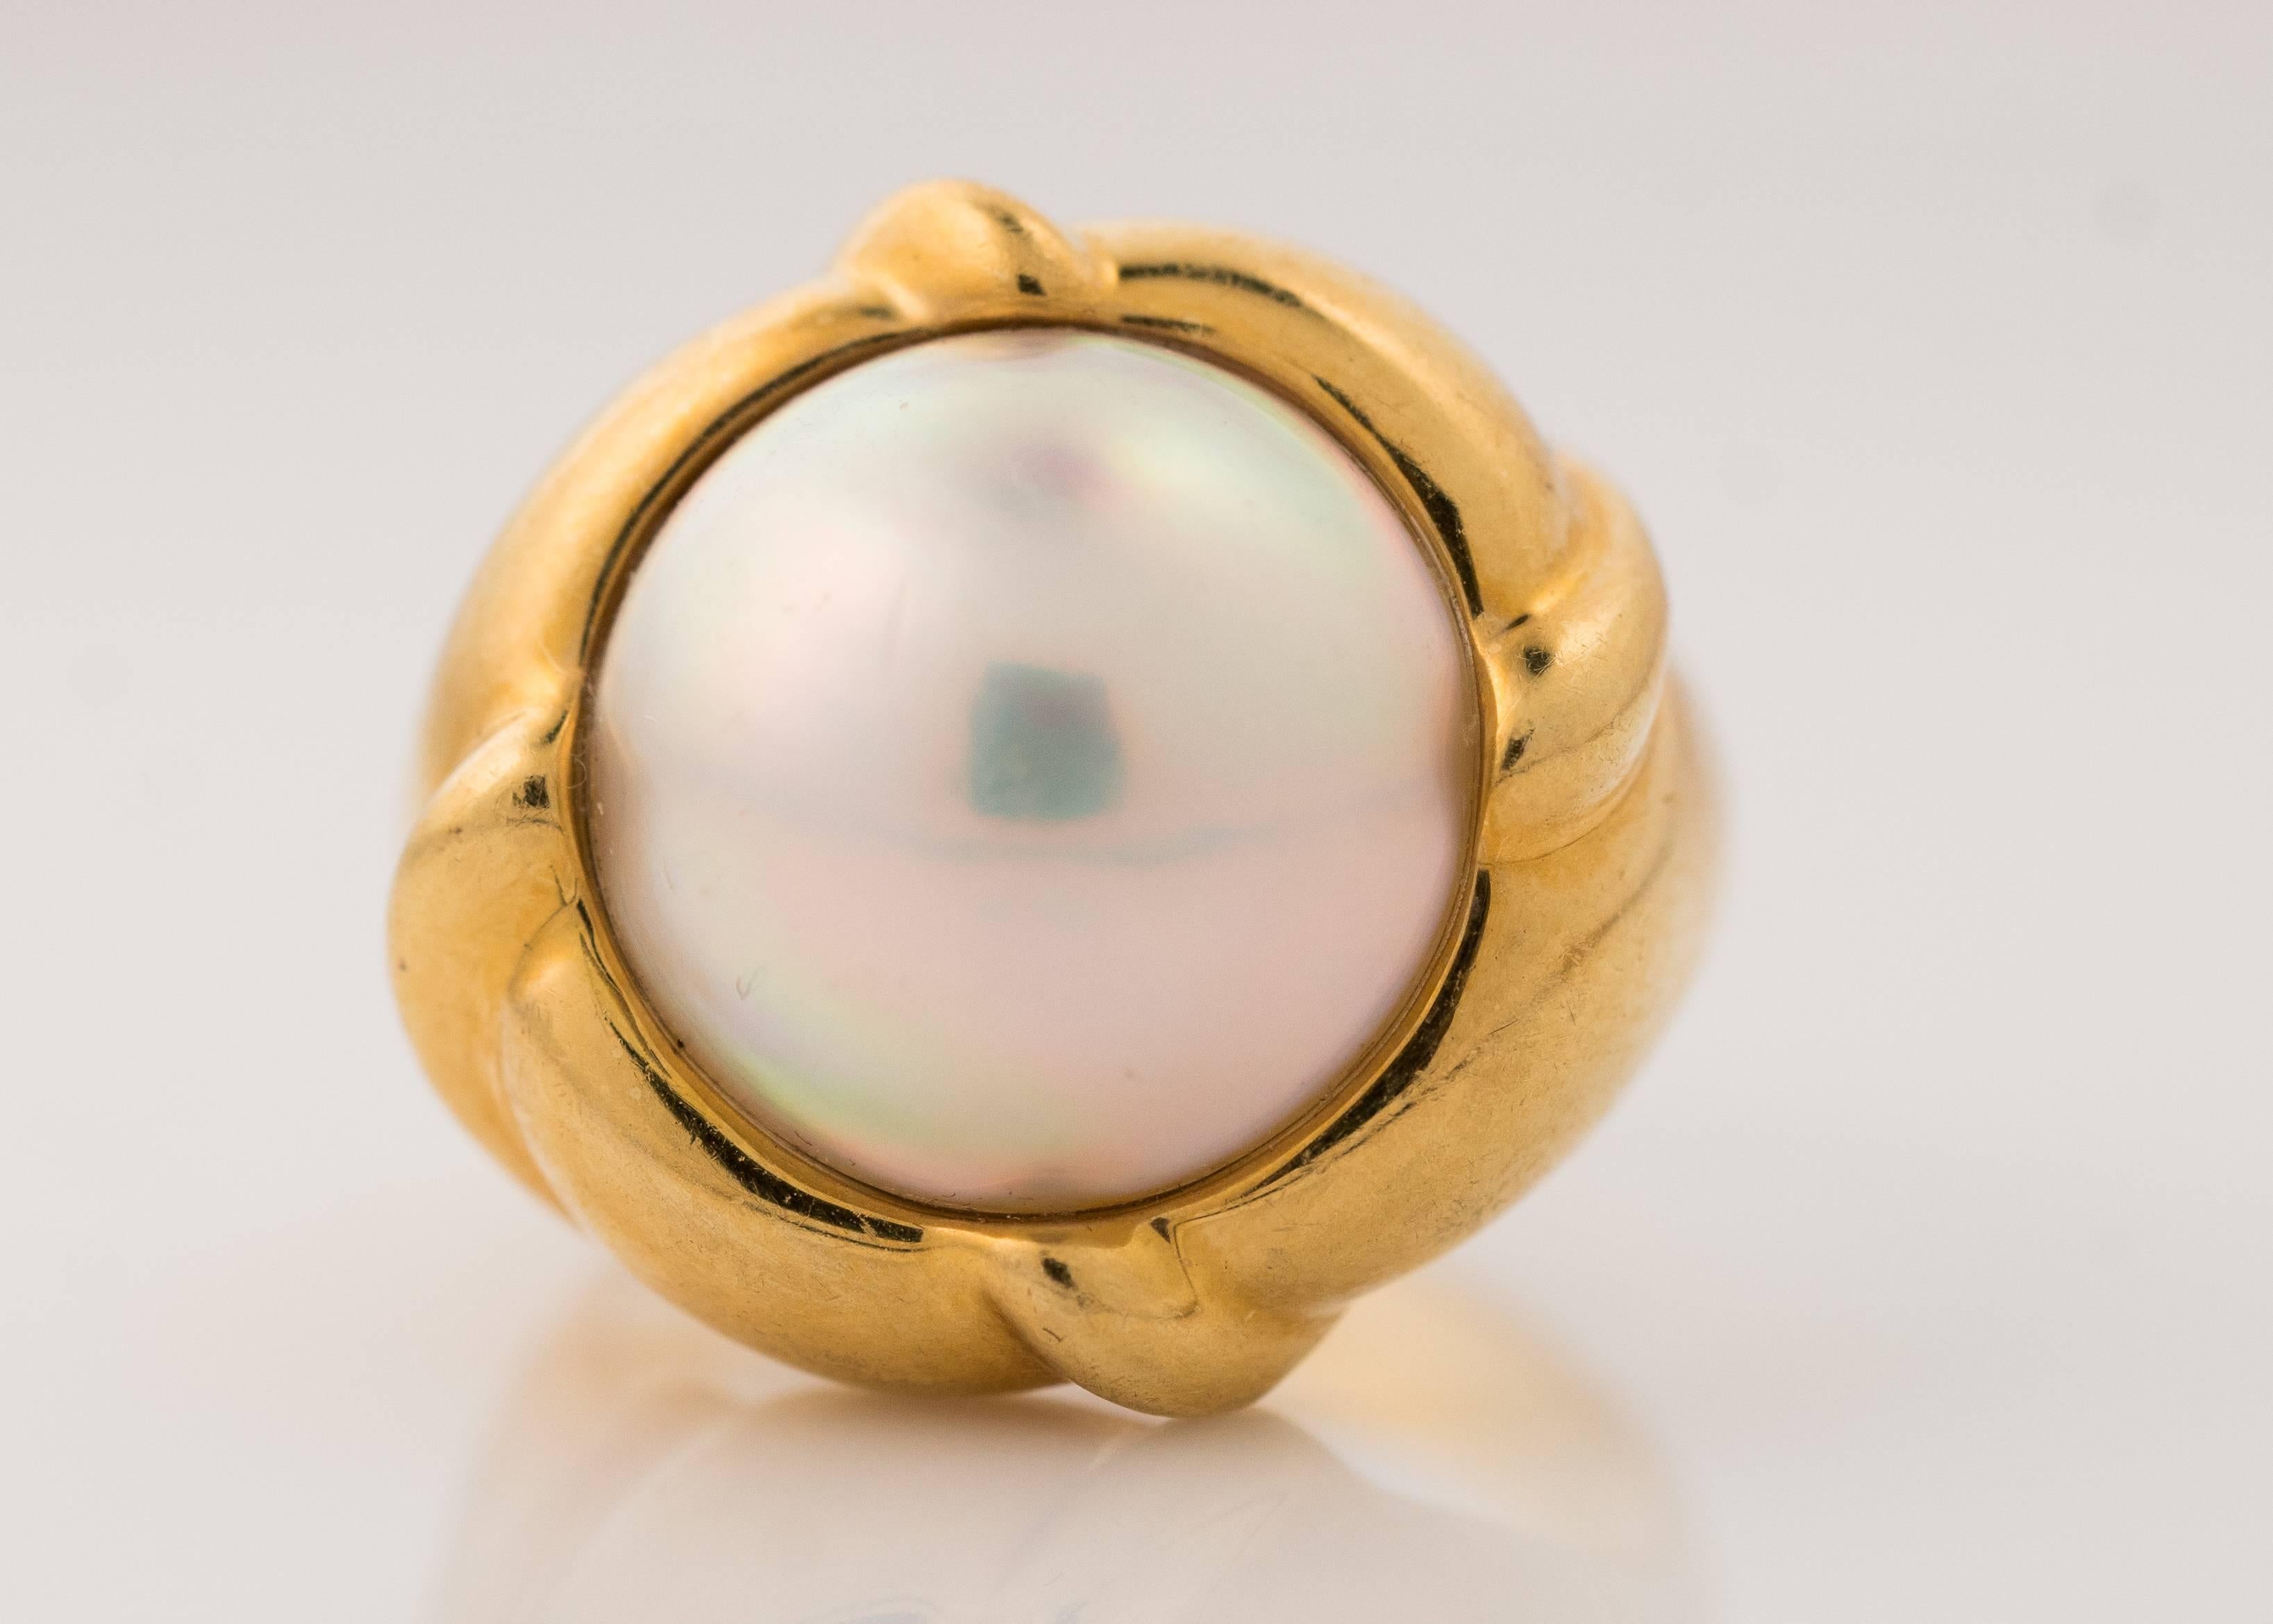 1980s Tiffany and Co. Pearl Cocktail Ring. 
Features a 13.5 millimeter Mabe Pearl in 18 Karat Yellow Gold. This gorgeous, opalescent Pearl is rich with pink, purple and blue hues. Four smooth ribbons of gold wrap from the inner edge of the band to